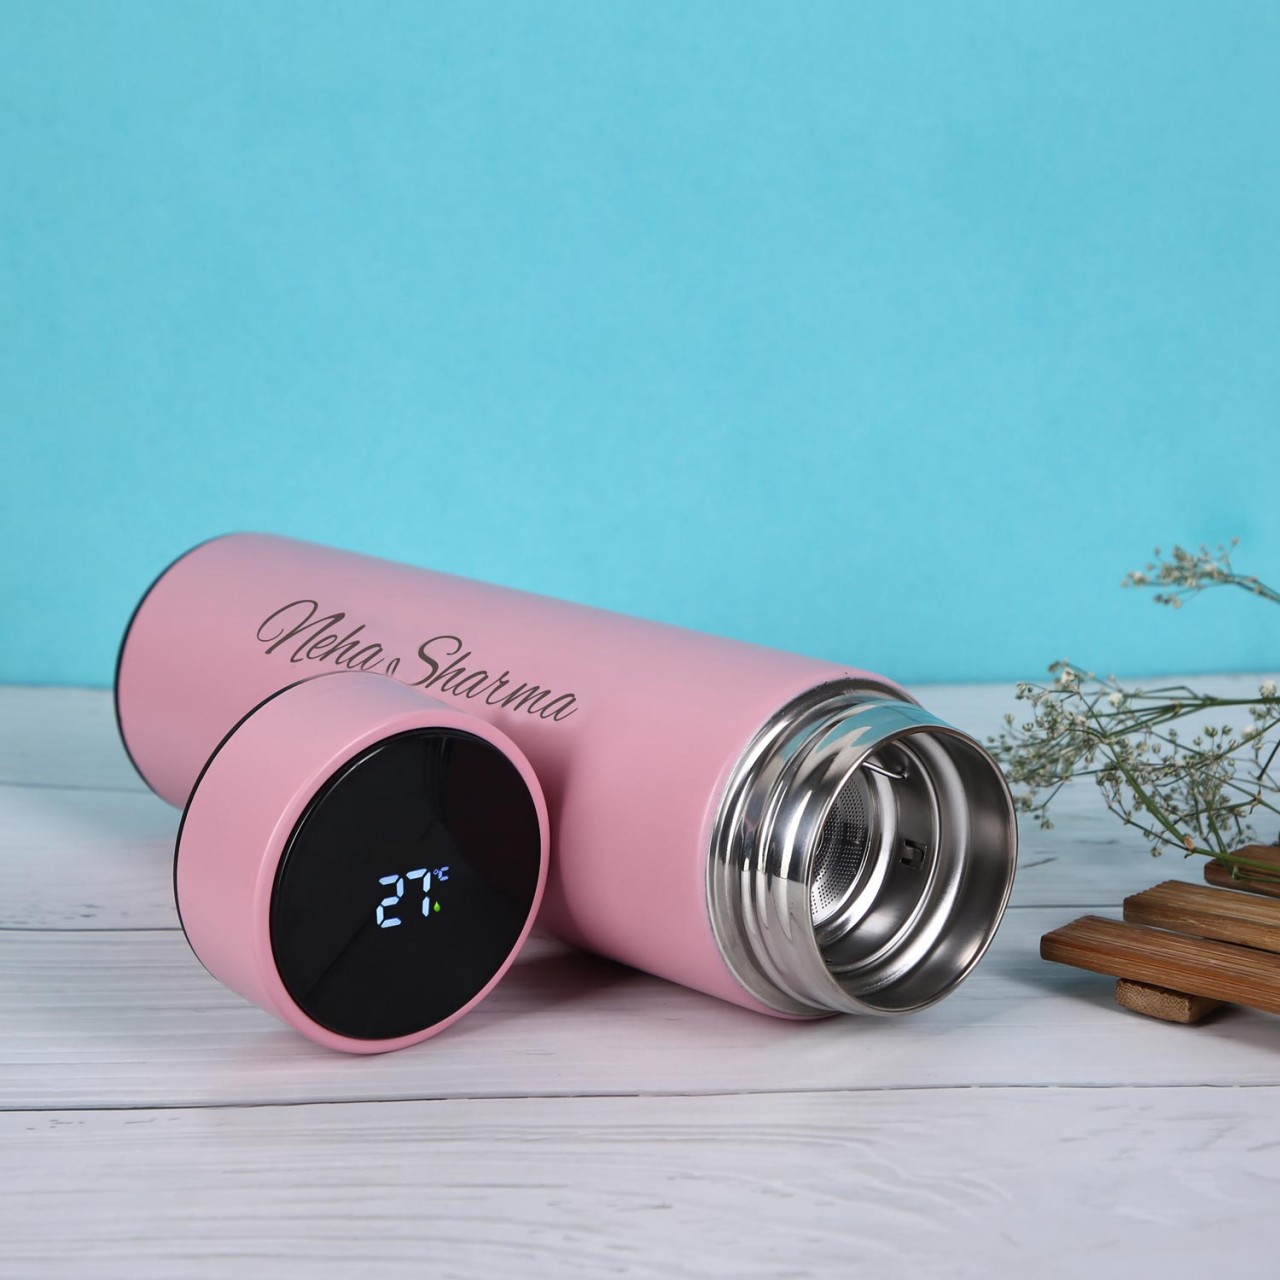 Personalized Temperature Bottle With Smart Display - Pink